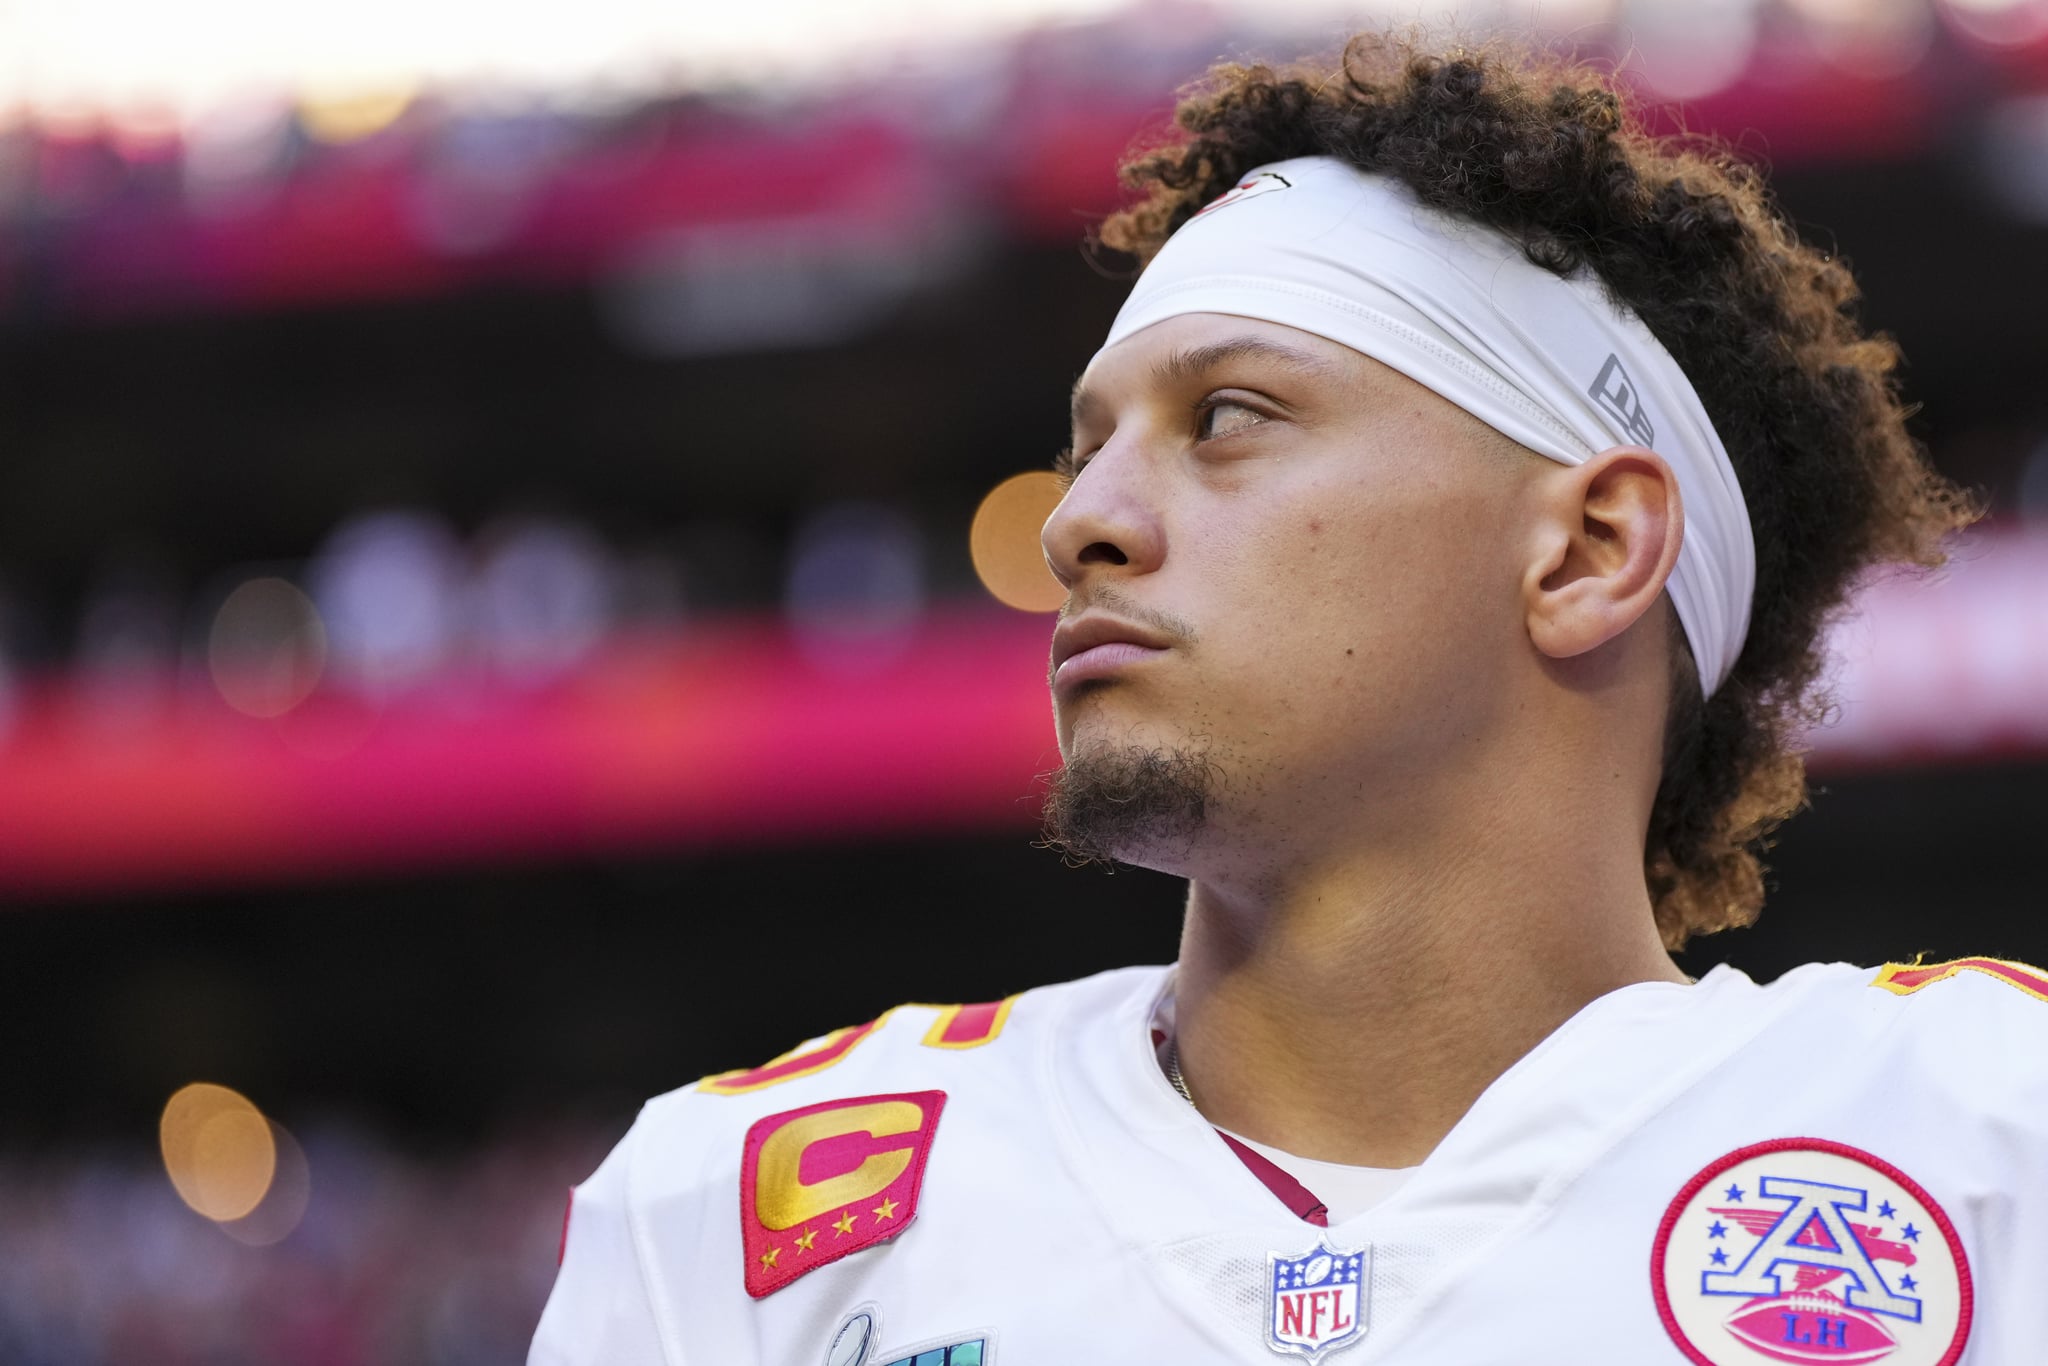 GLENDALE, AZ - FEBRUARY 12: Patrick Mahomes #15 of the Kansas City Chiefs stands during the national anthem against the Philadelphia Eagles after Super Bowl LVII at State Farm Stadium on February 12, 2023 in Glendale, Arizona. The Chiefs defeated the Eagles 38-35. (Photo by Cooper Neill/Getty Images)